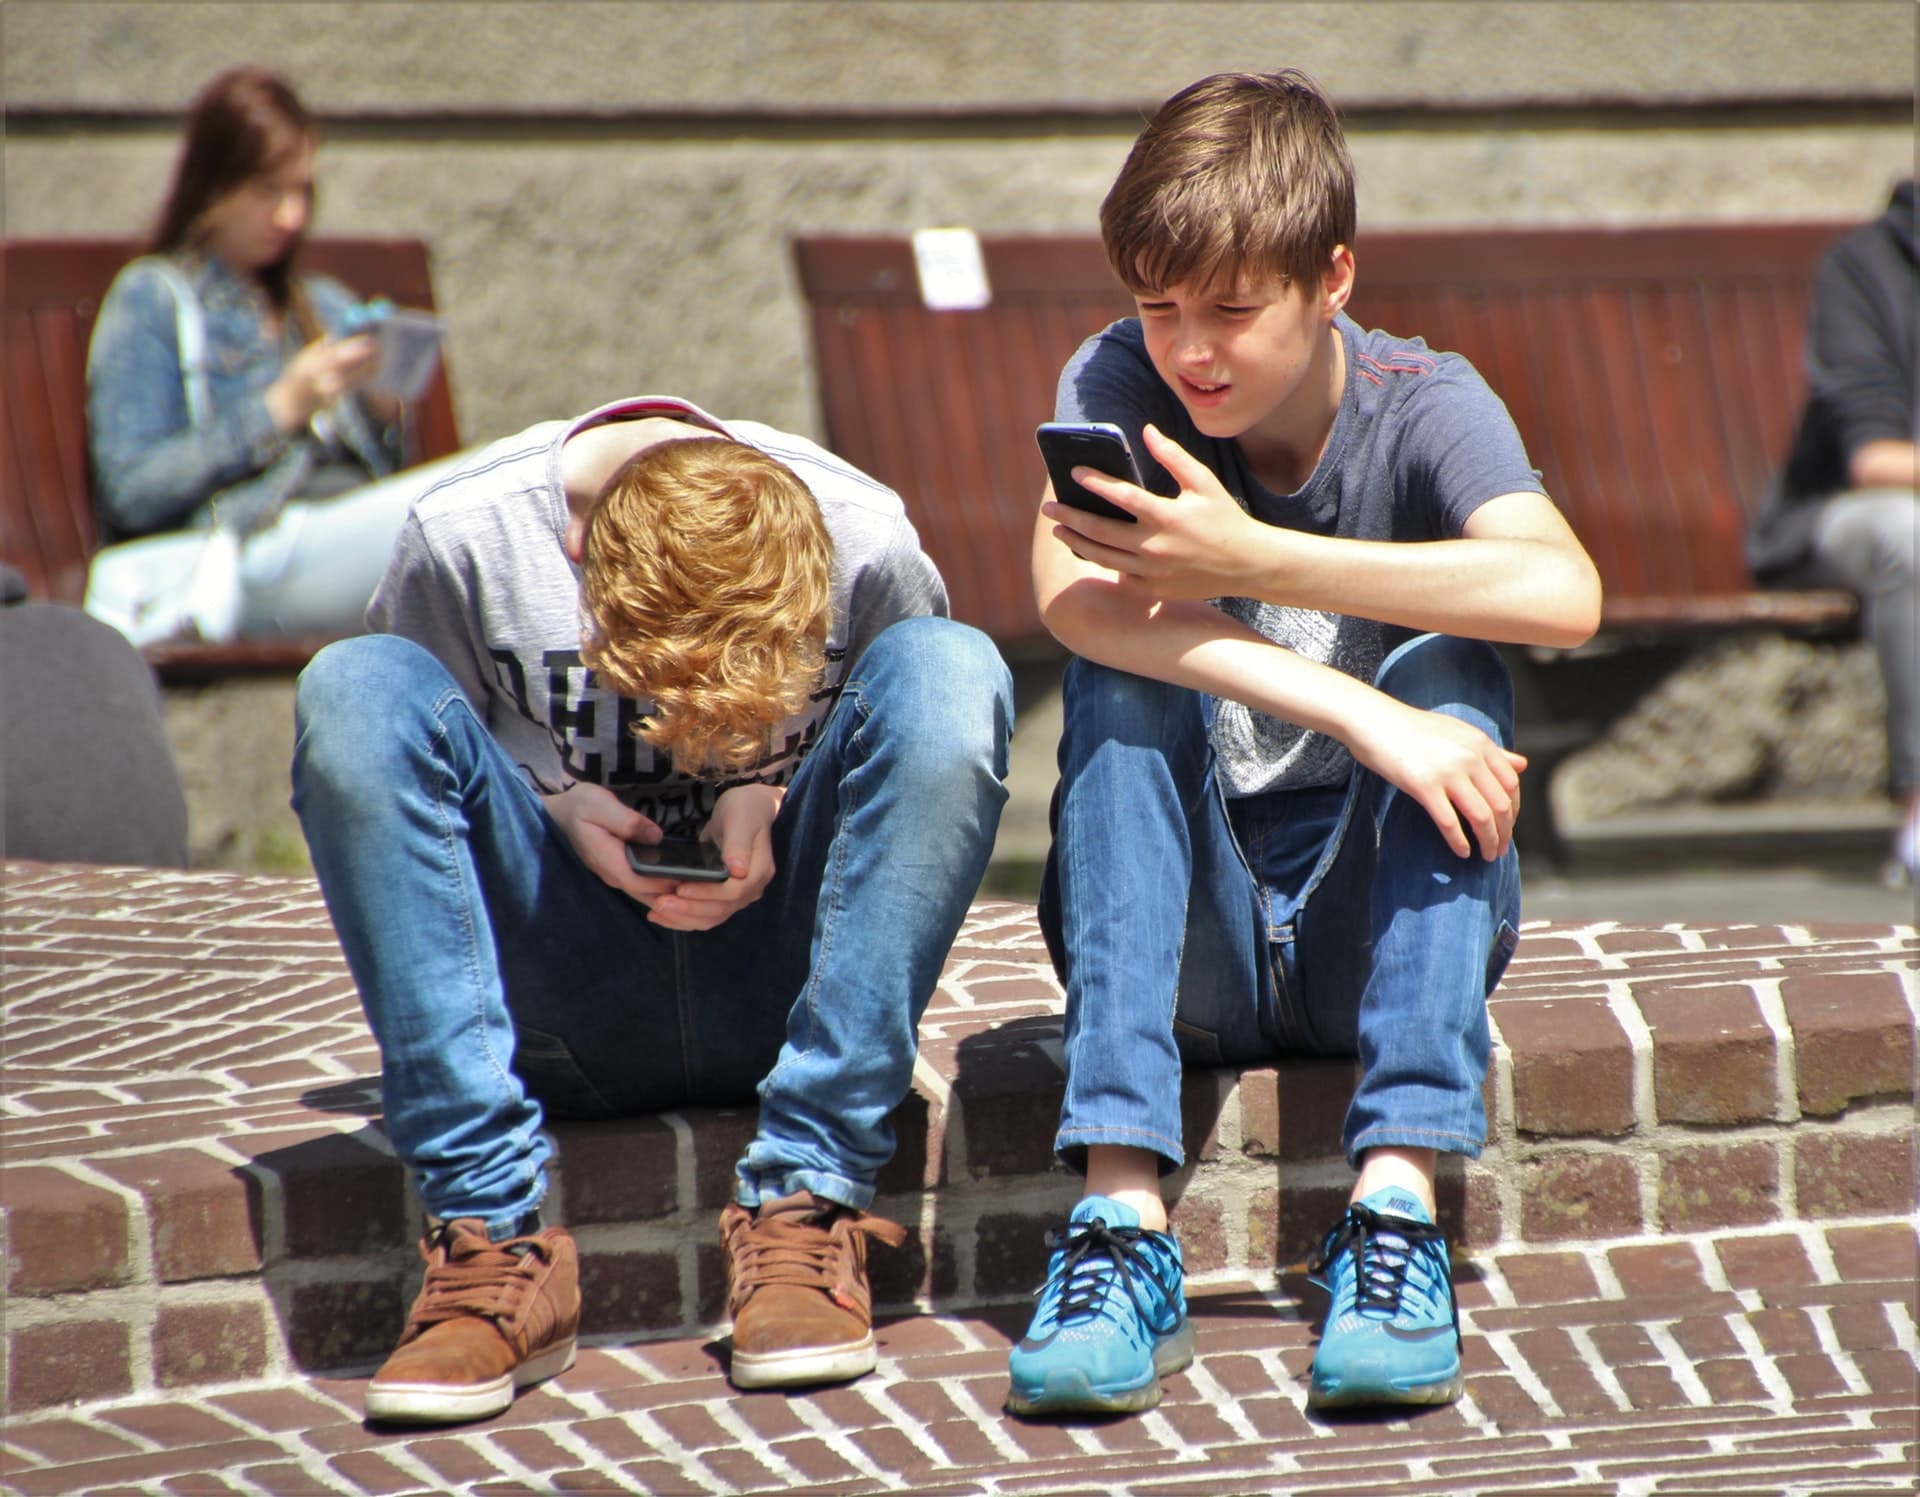 5 Reasons Why Parents Should Monitor Their Kids' Phone